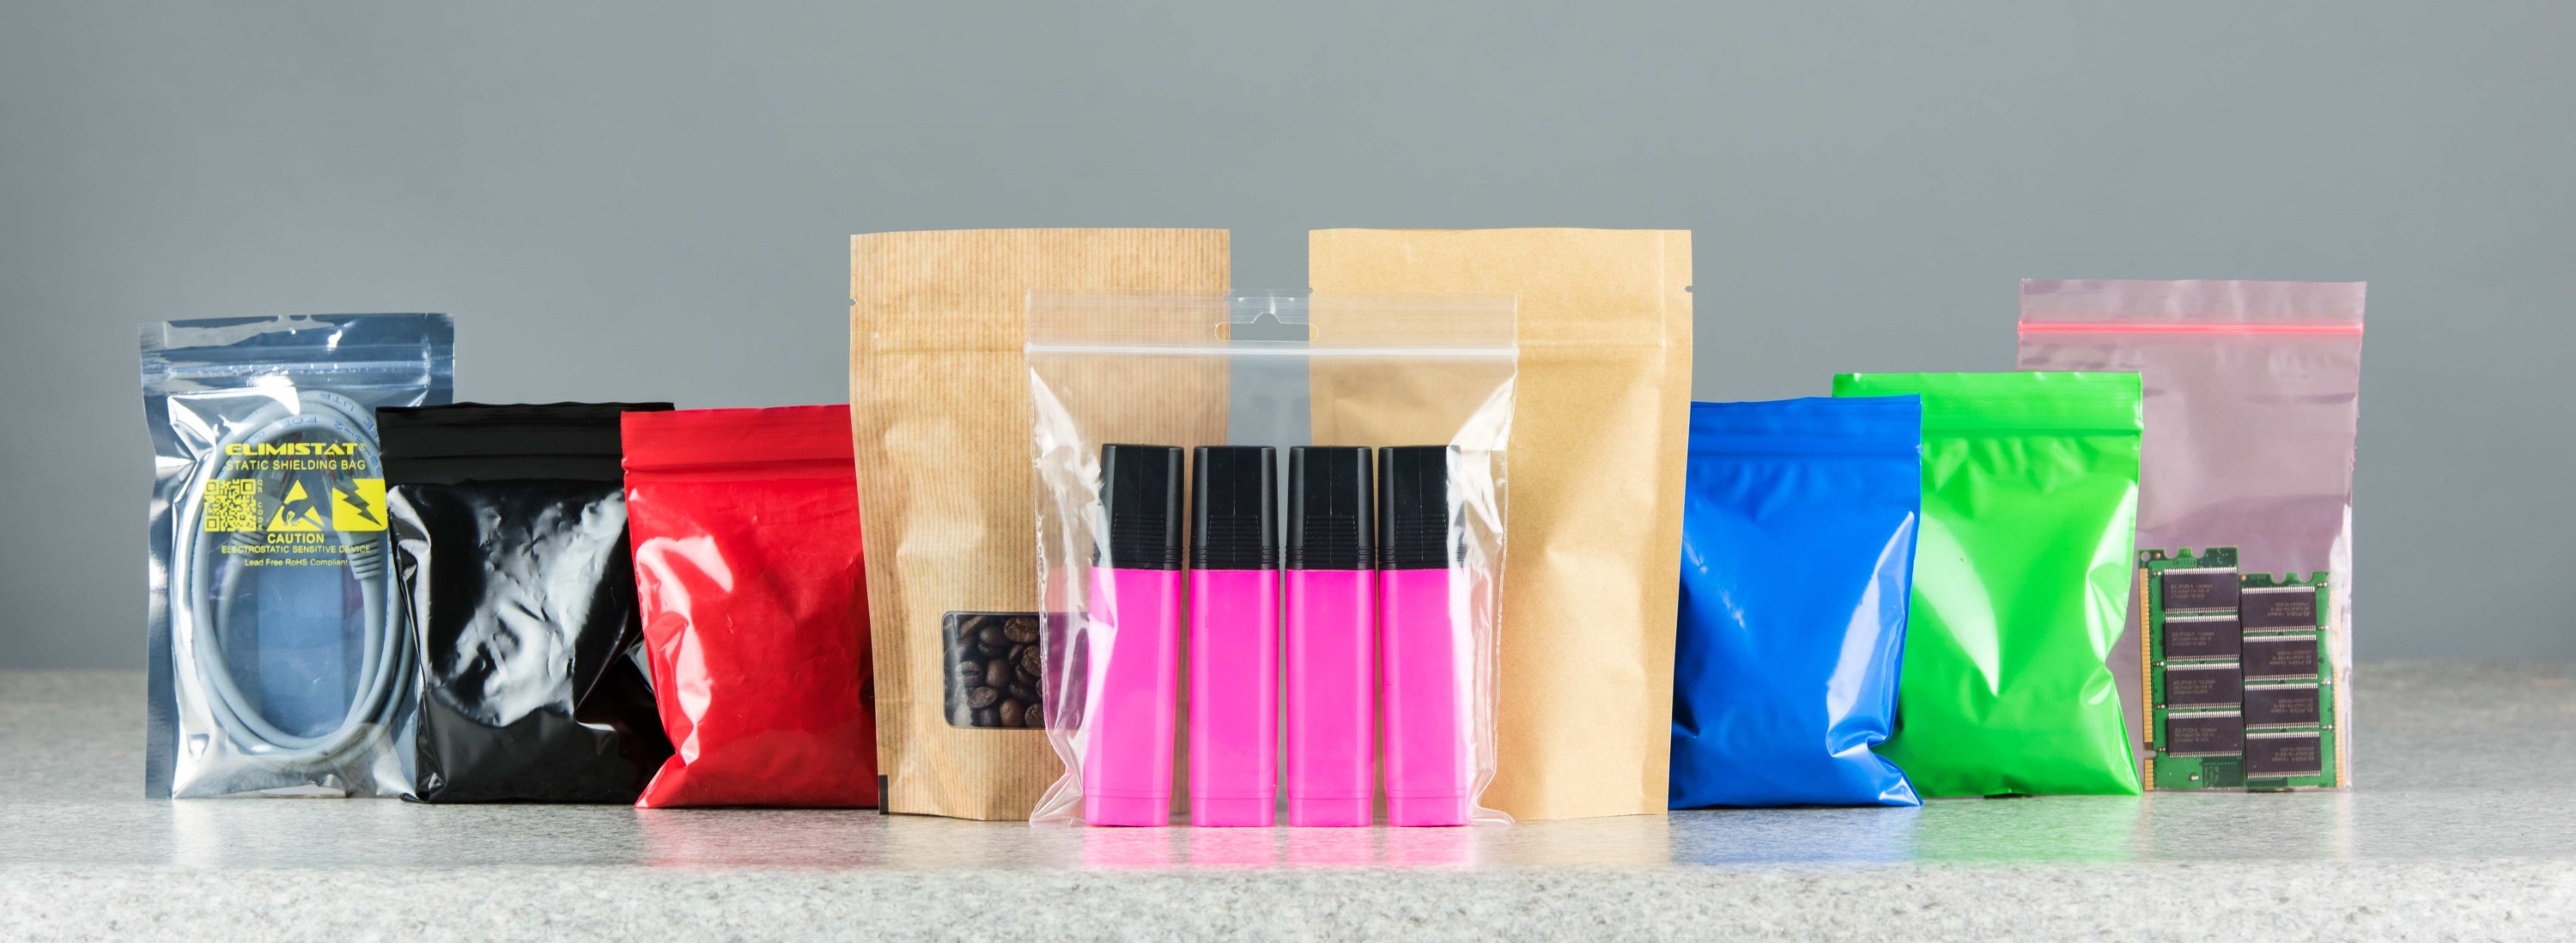 https://www.polybags.co.uk/assets/packaging/images/grip-seal-bags.jpg